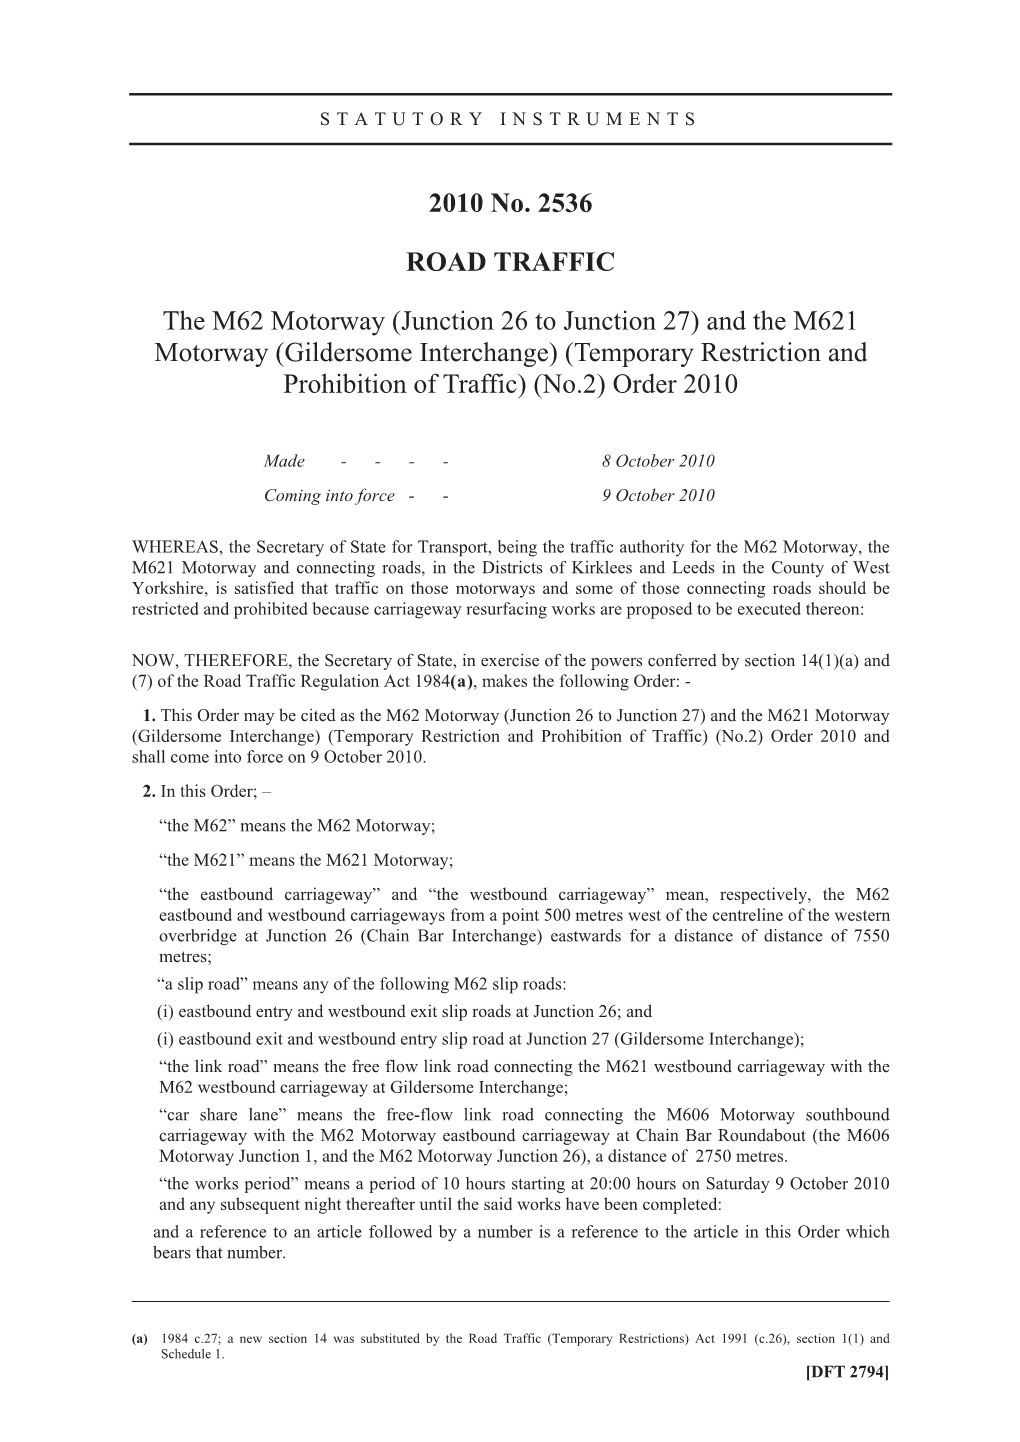 And the M621 Motorway (Gildersome Interchange) (Temporary Restriction and Prohibition of Traffic) (No.2) Order 2010